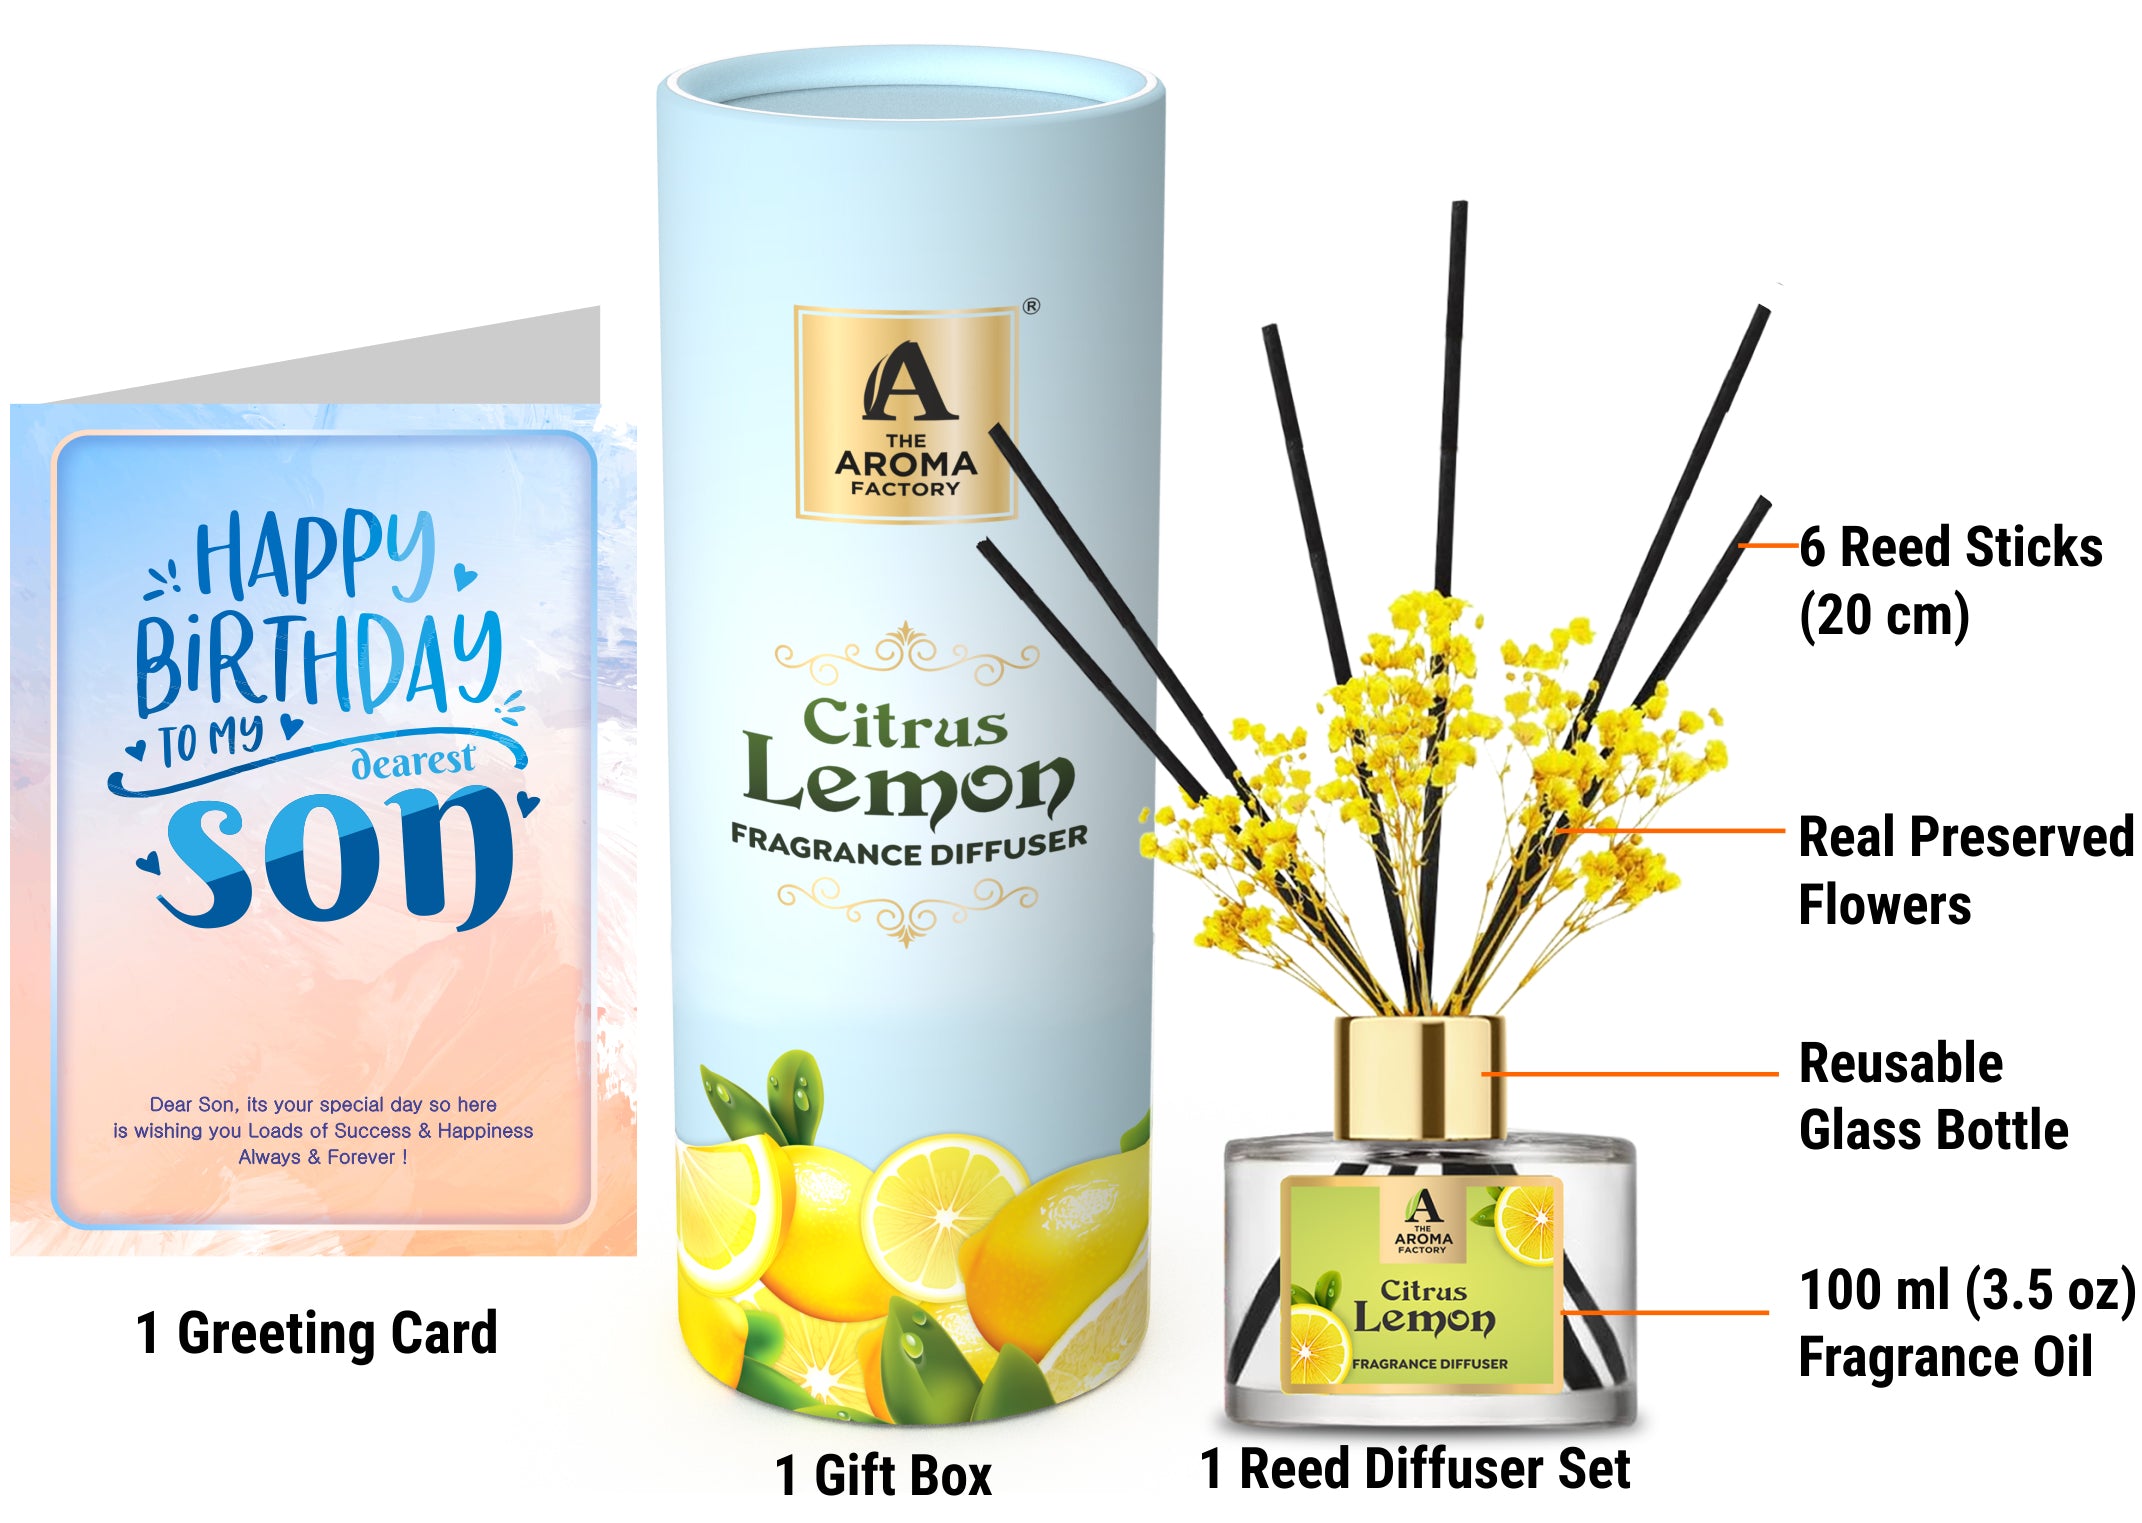 The Aroma Factory Happy Birthday Gift for Son/Beta with Card, Citrus Lemon Fragrance Reed Diffuser Set (1 Box + 1 Card)